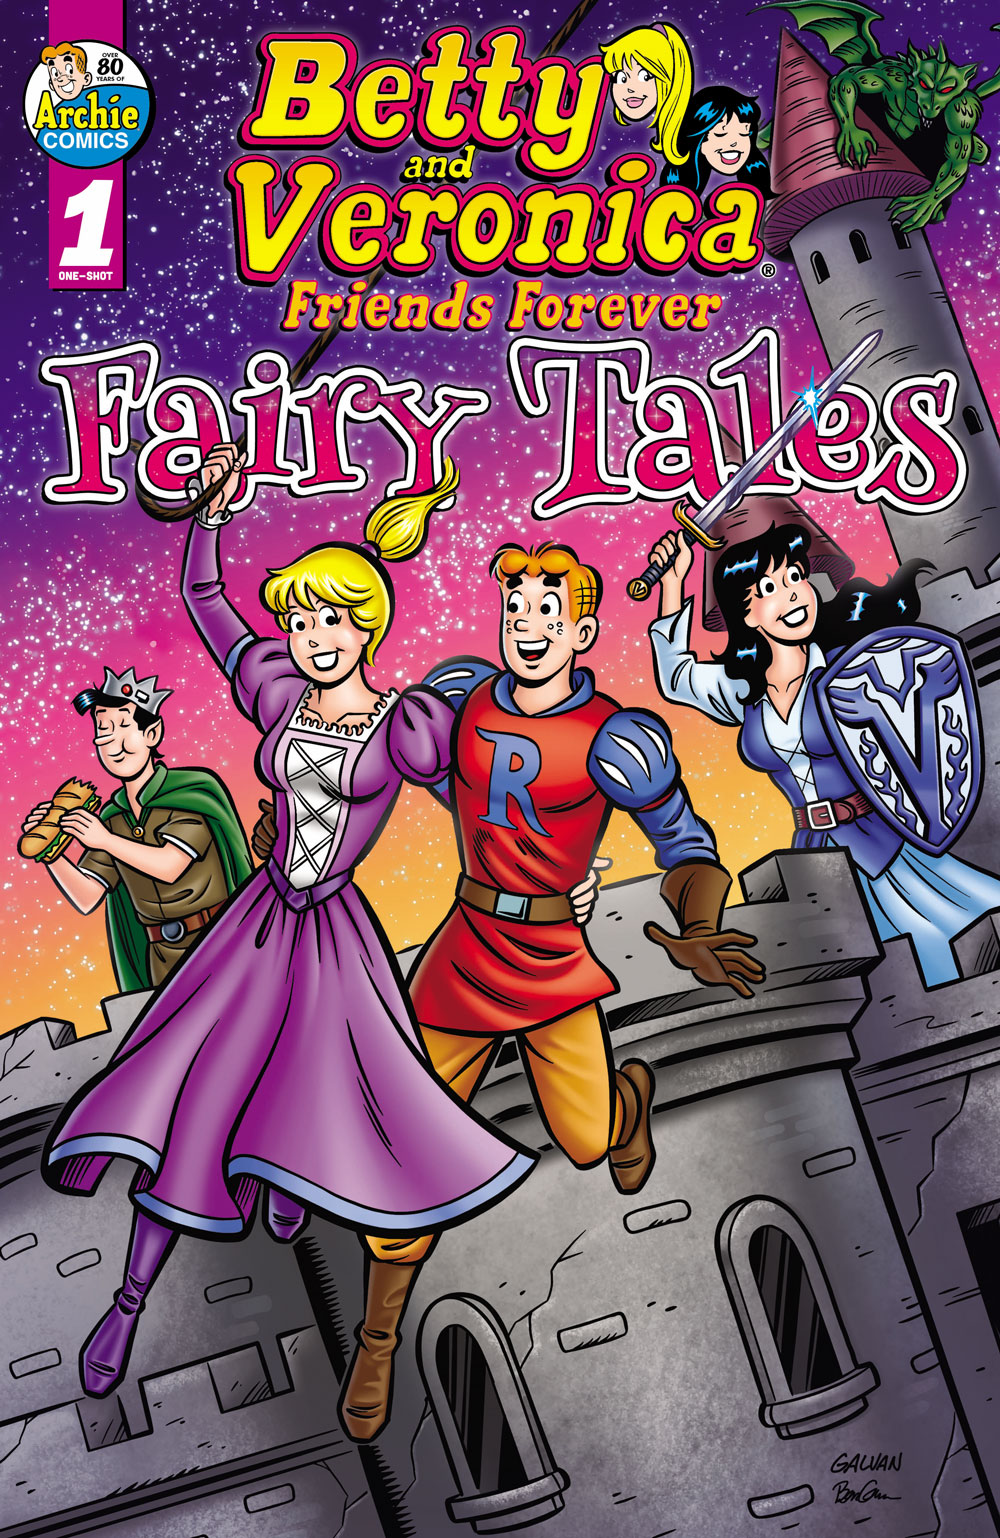 Betty, Archie, and Veronica, all wearing fairy tale costumes, are on top of a medieval castle at night, with a monster climbing a turret in the background. Veronica holds a sword while Betty swings off the ramparts, holding Archie. Jughead stands in the background casually eating a submarine sandwich.